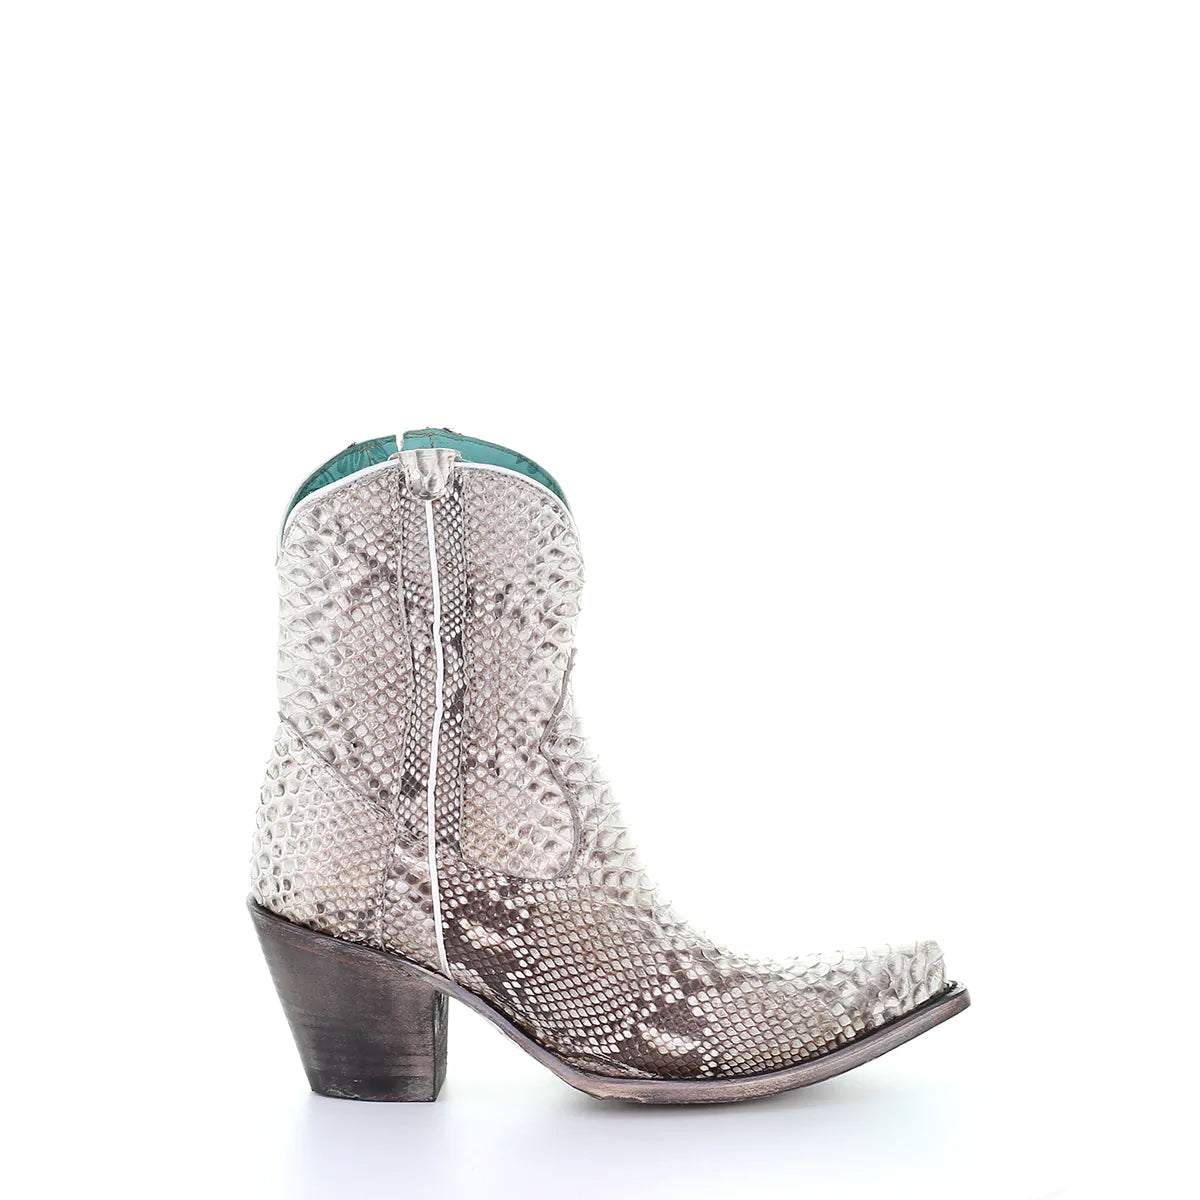 A3791 - Corral white western cowgirl python ankle boots for women-Kuet.us